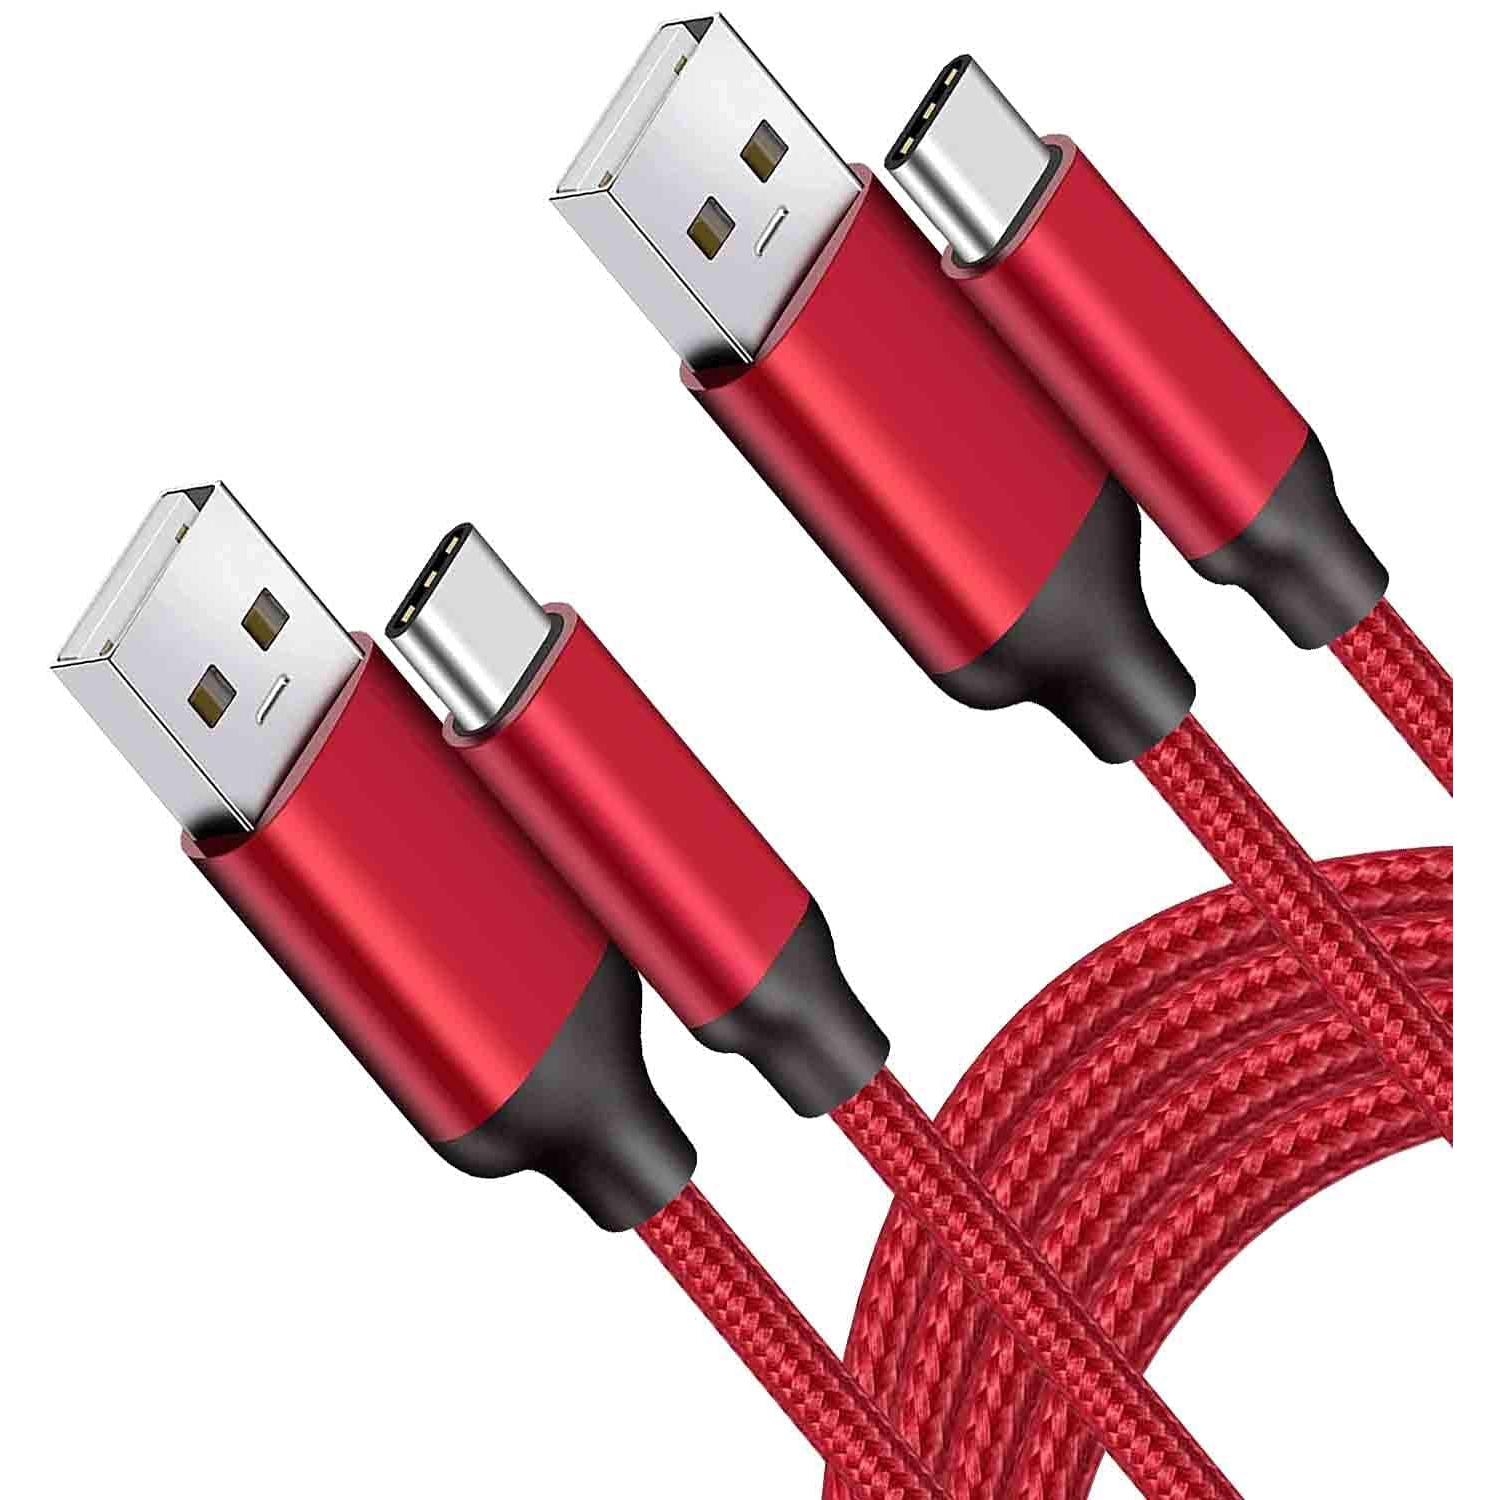 10FT 2PACK USB Type C Cable,Fast Charger,Long Charging Cord for Samsung Galaxy Note 10 9,S10 S10e Plus,A01 A10e A11 A20